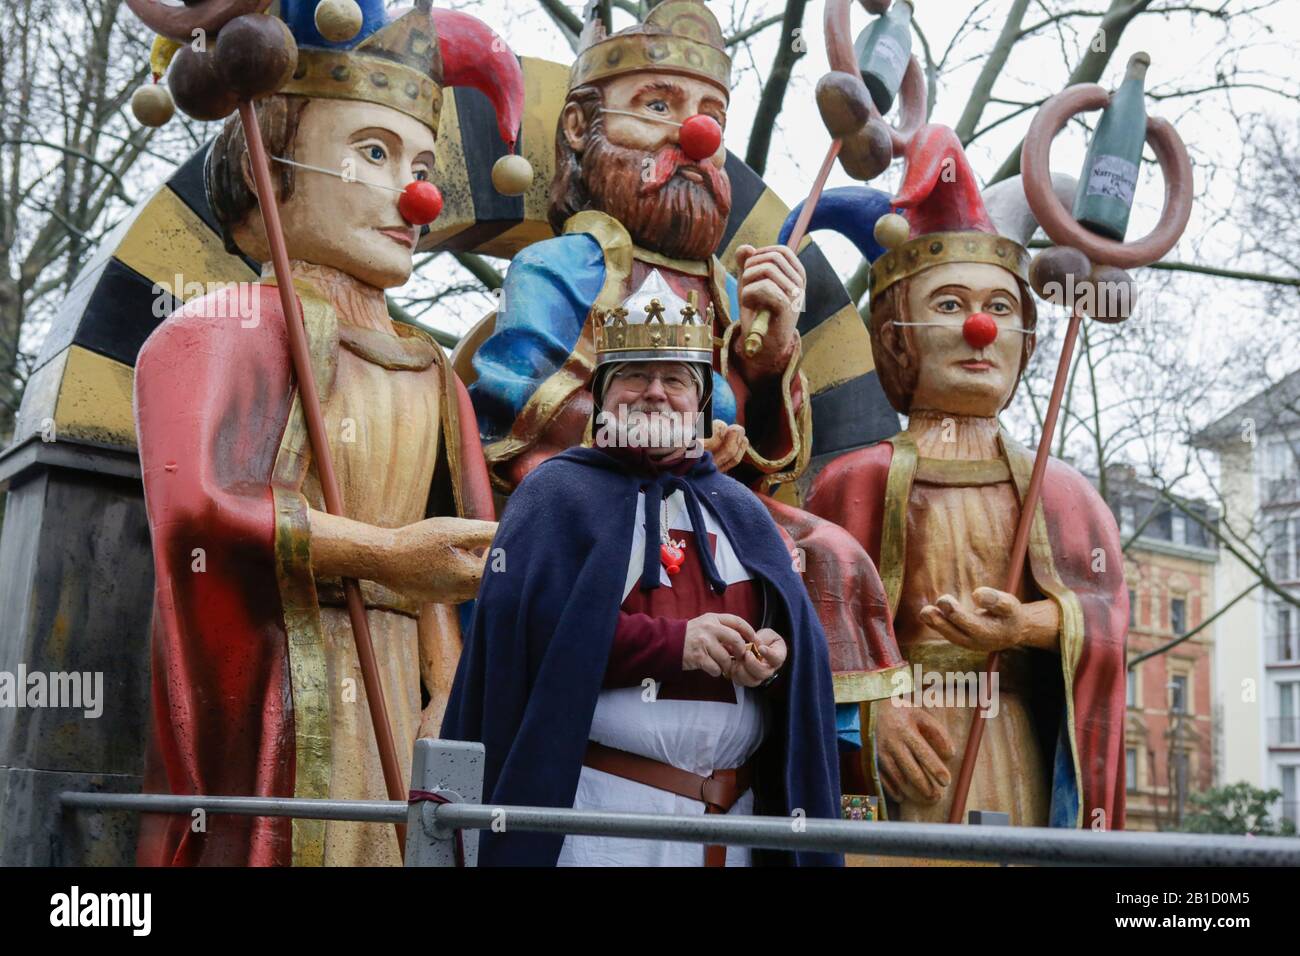 Emperor Friedrich I and his sons are depicted on a float in the Mainz Rose Monday parade, wearing carnival costumes. The float represents the exhibition 'The Emperors and the pillars of their power' in the Mainz State Museum. Alfried Wieczorek, the director of the Reiss Engelhorn Museum in Mannheim, rides in a knights costume on the float. Alfried Wieczorek, director of the Reiss Engelhorn Museum, rem, Reiss Engelhorn Museum. Around half a million people lined the streets of Mainz for the traditional Rose Monday Carnival Parade. The 9 km long parade with over 9,000 participants is one of the t Stock Photo